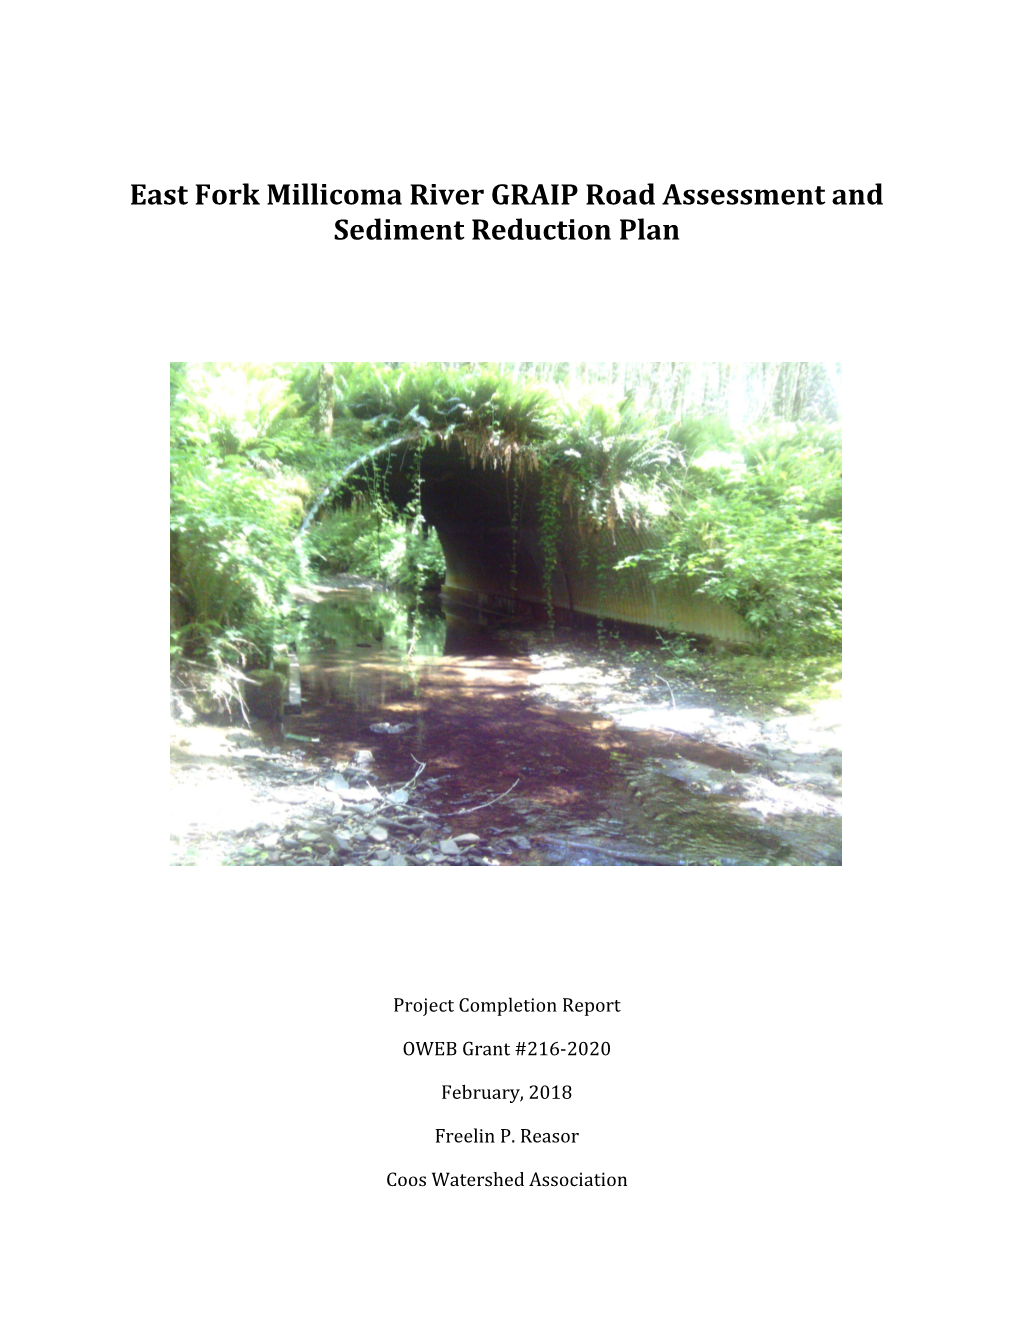 East Fork Millicoma River GRAIP Road Assessment and Sediment Reduction Plan